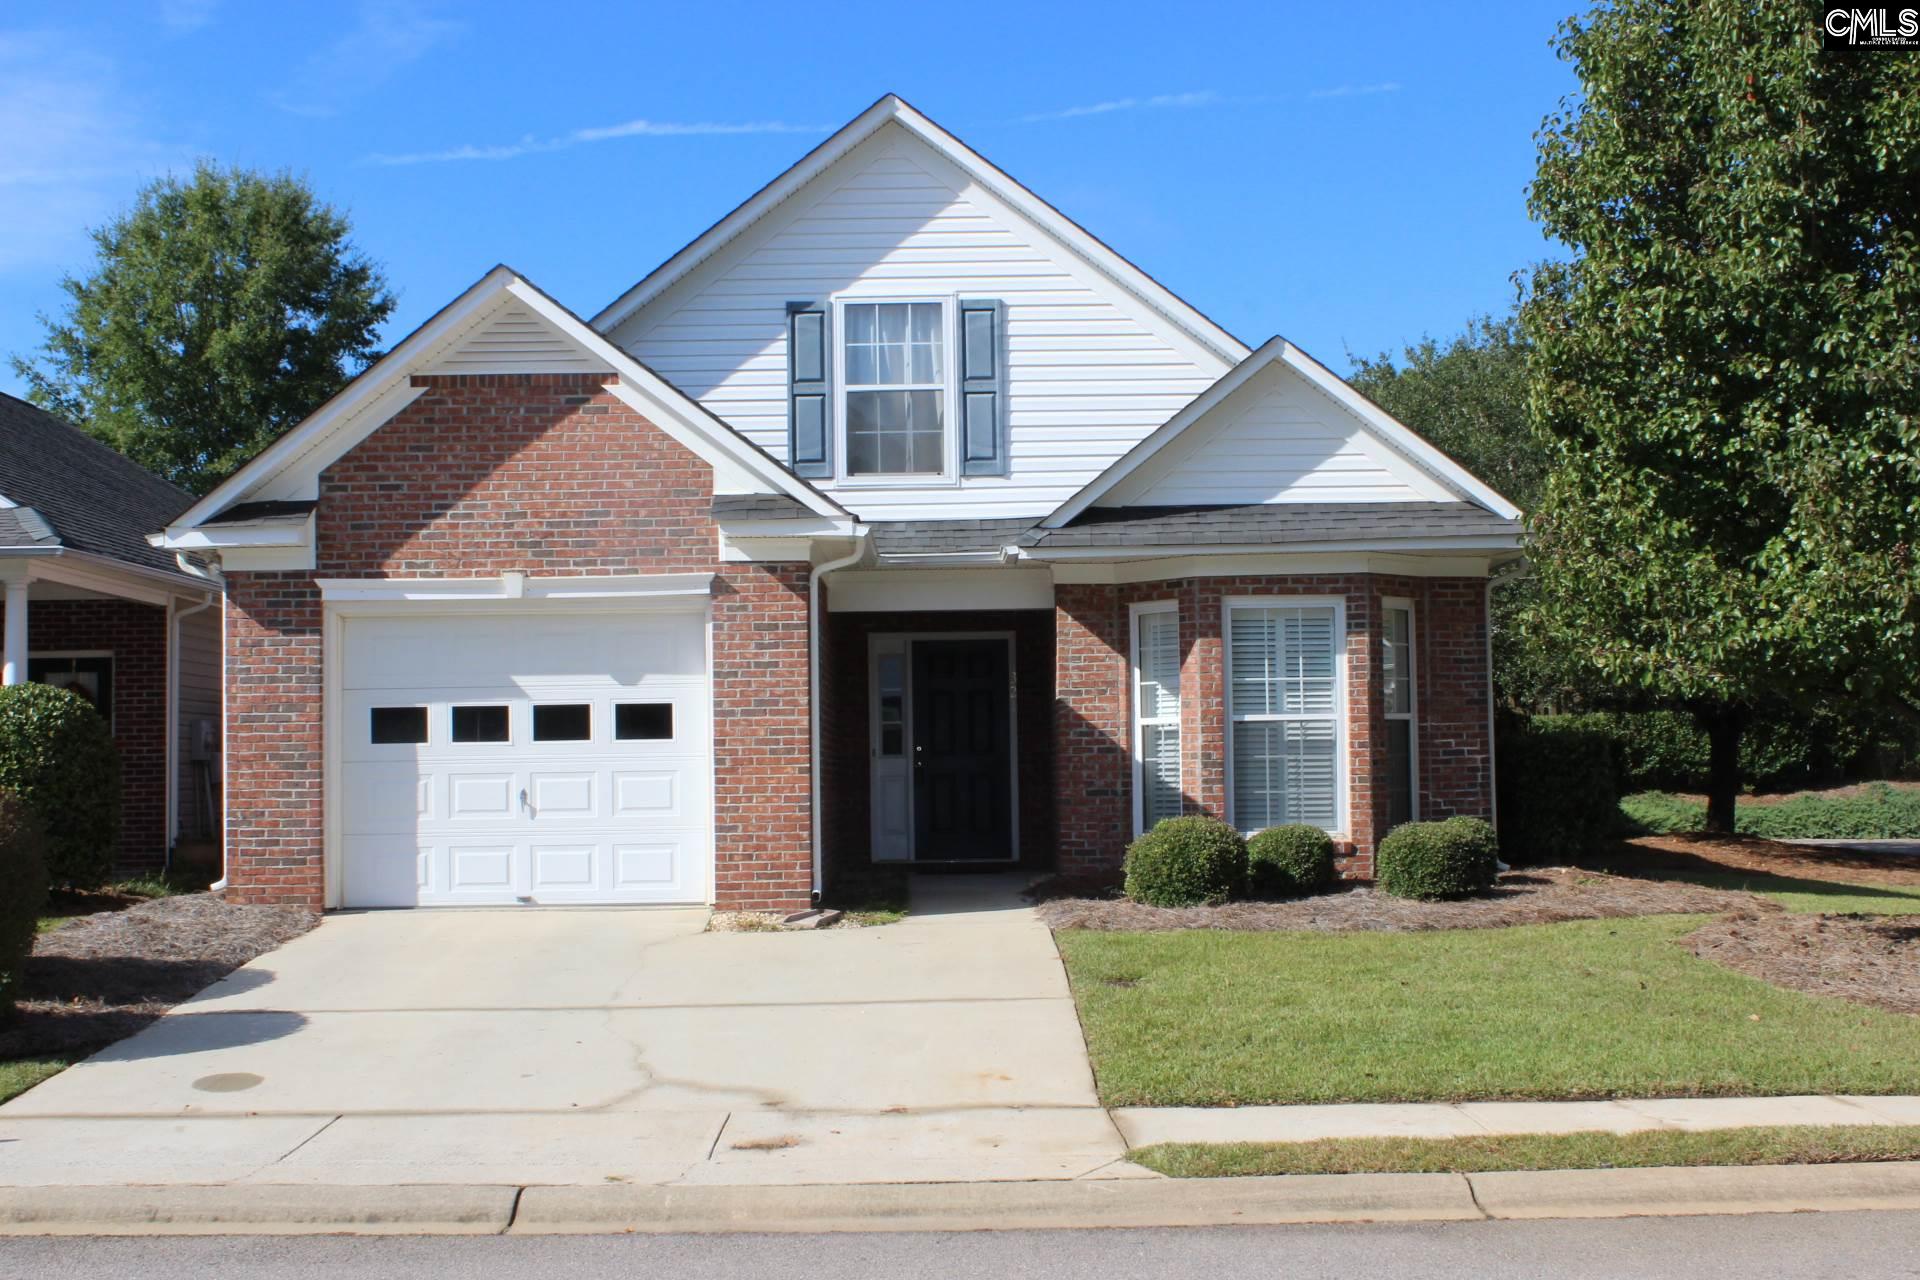 321 Sweetbirch West Columbia, SC 29169